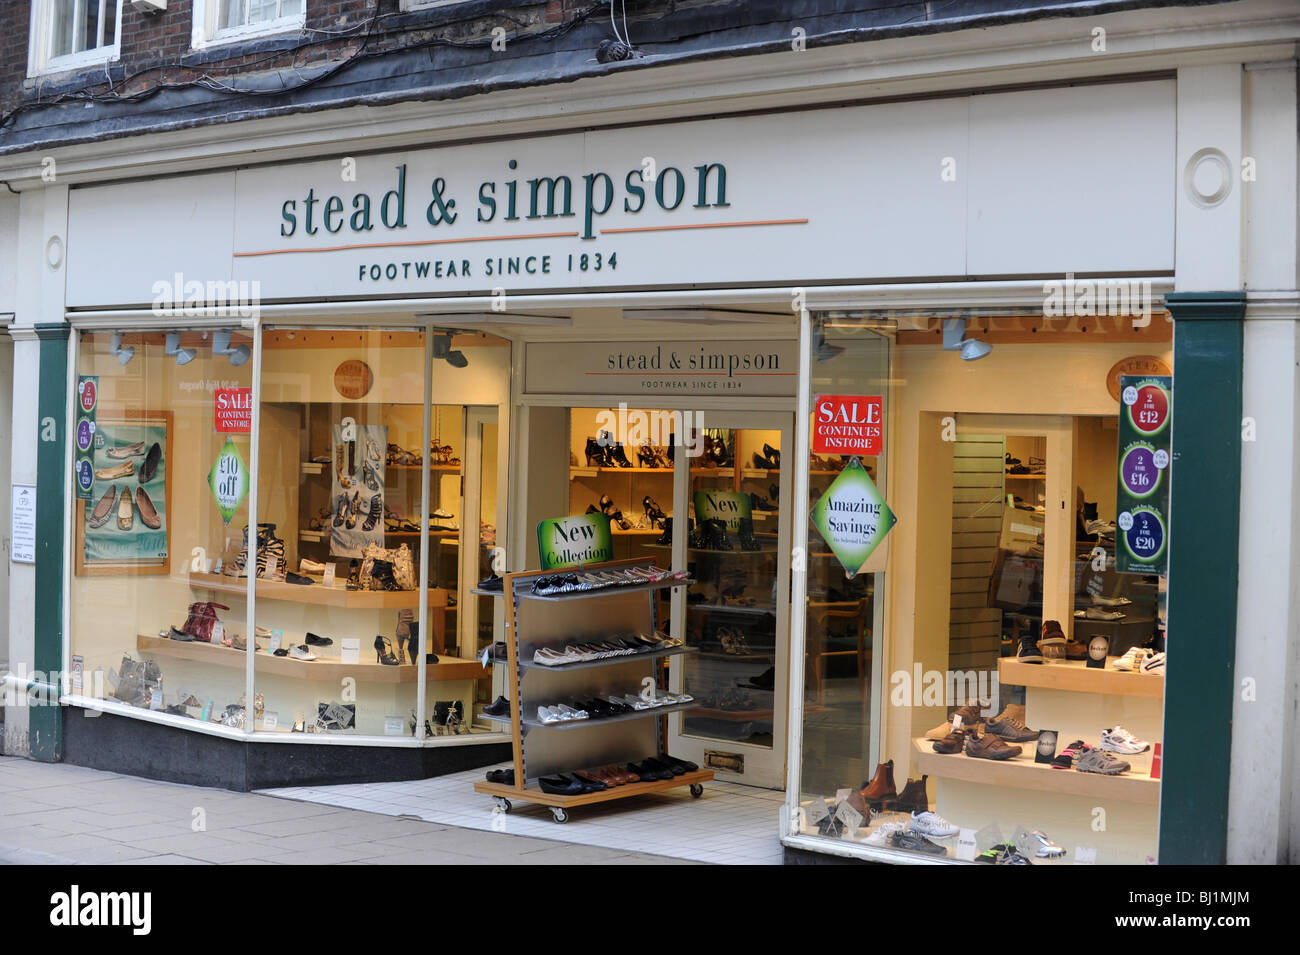 Stead and Simpson footwear shop sign in York England Uk Stock Photo